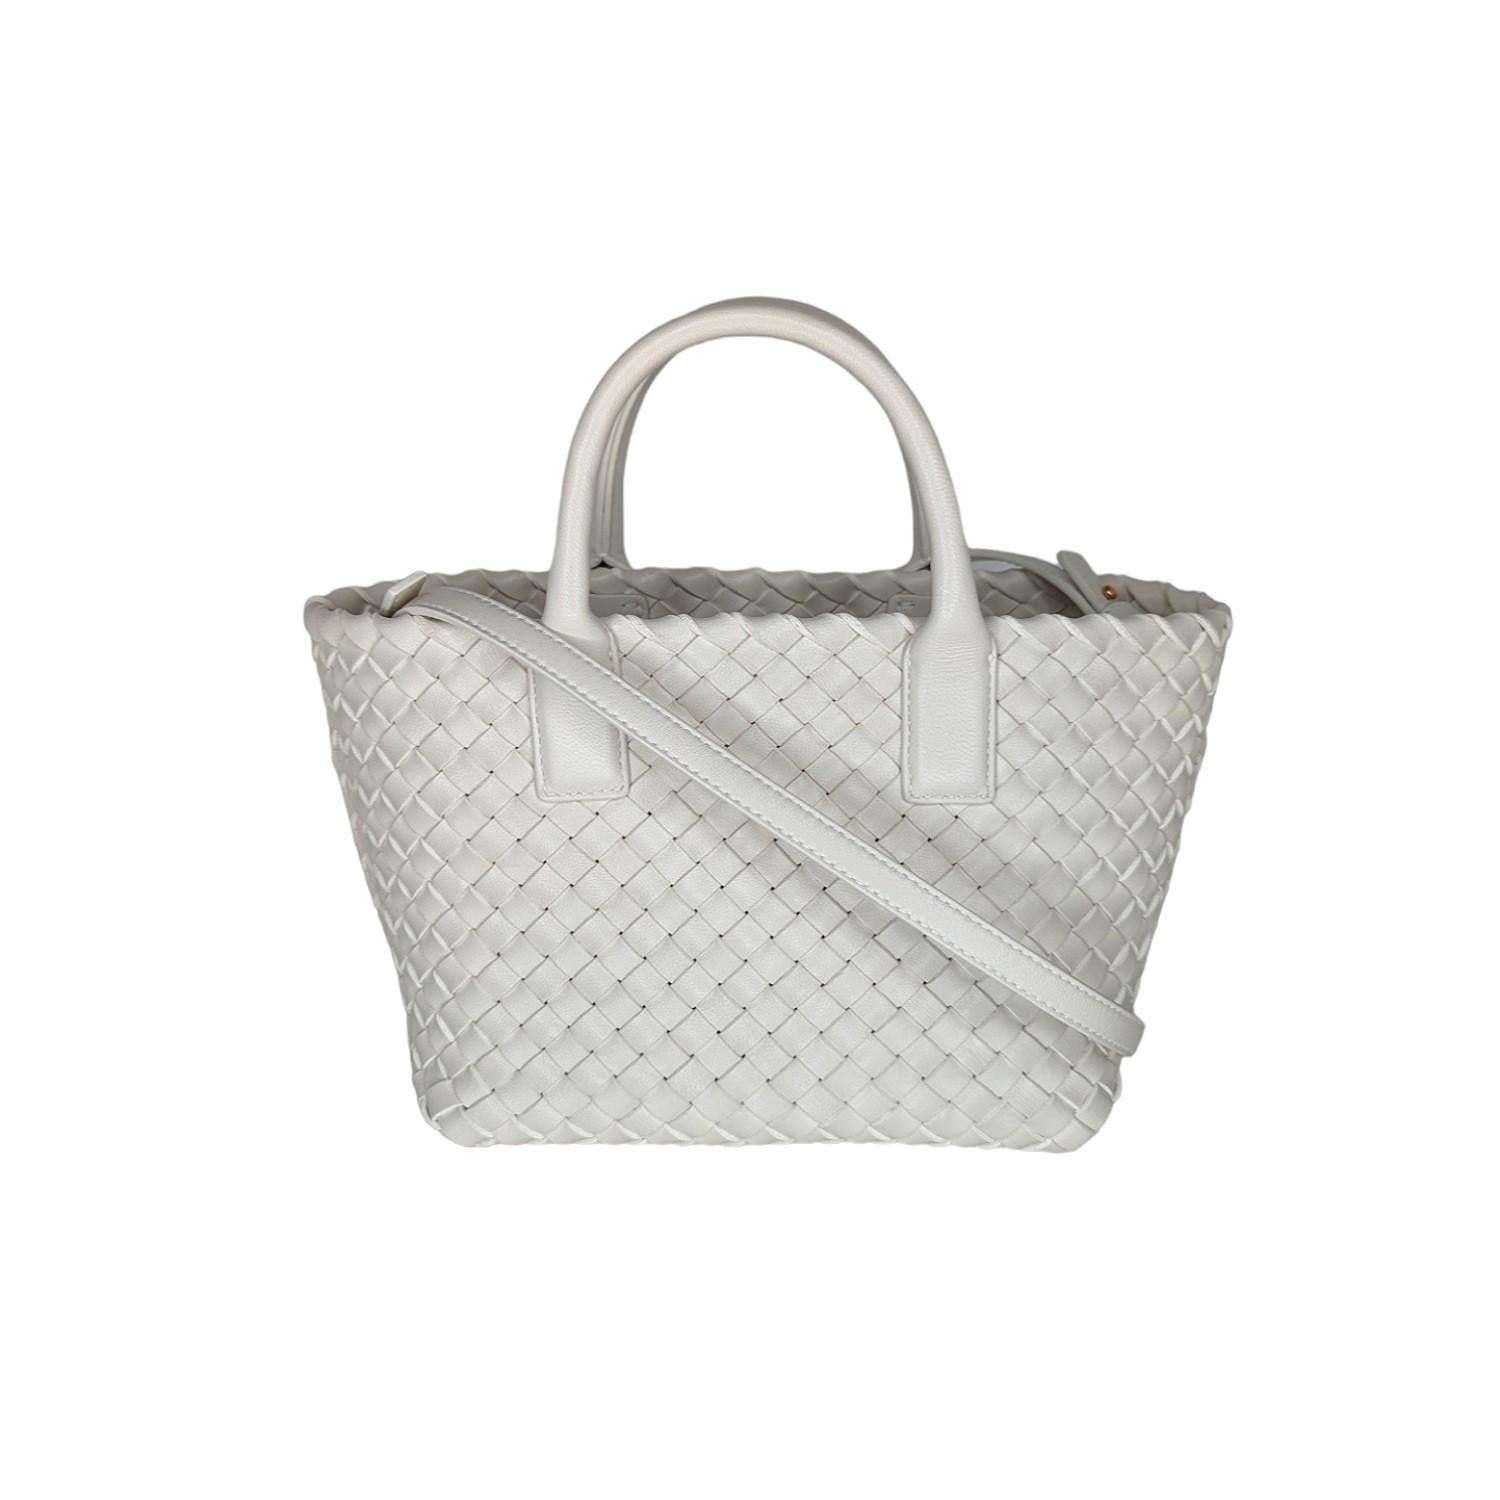 Bottega Veneta tote bag in signature Intrecciato lambskin leather in white. Featuring dual rolled top handles, gold-tone hardware, a removable, adjustable crossbody strap, open top with magnetic closure, spacious interior with a removable leashed